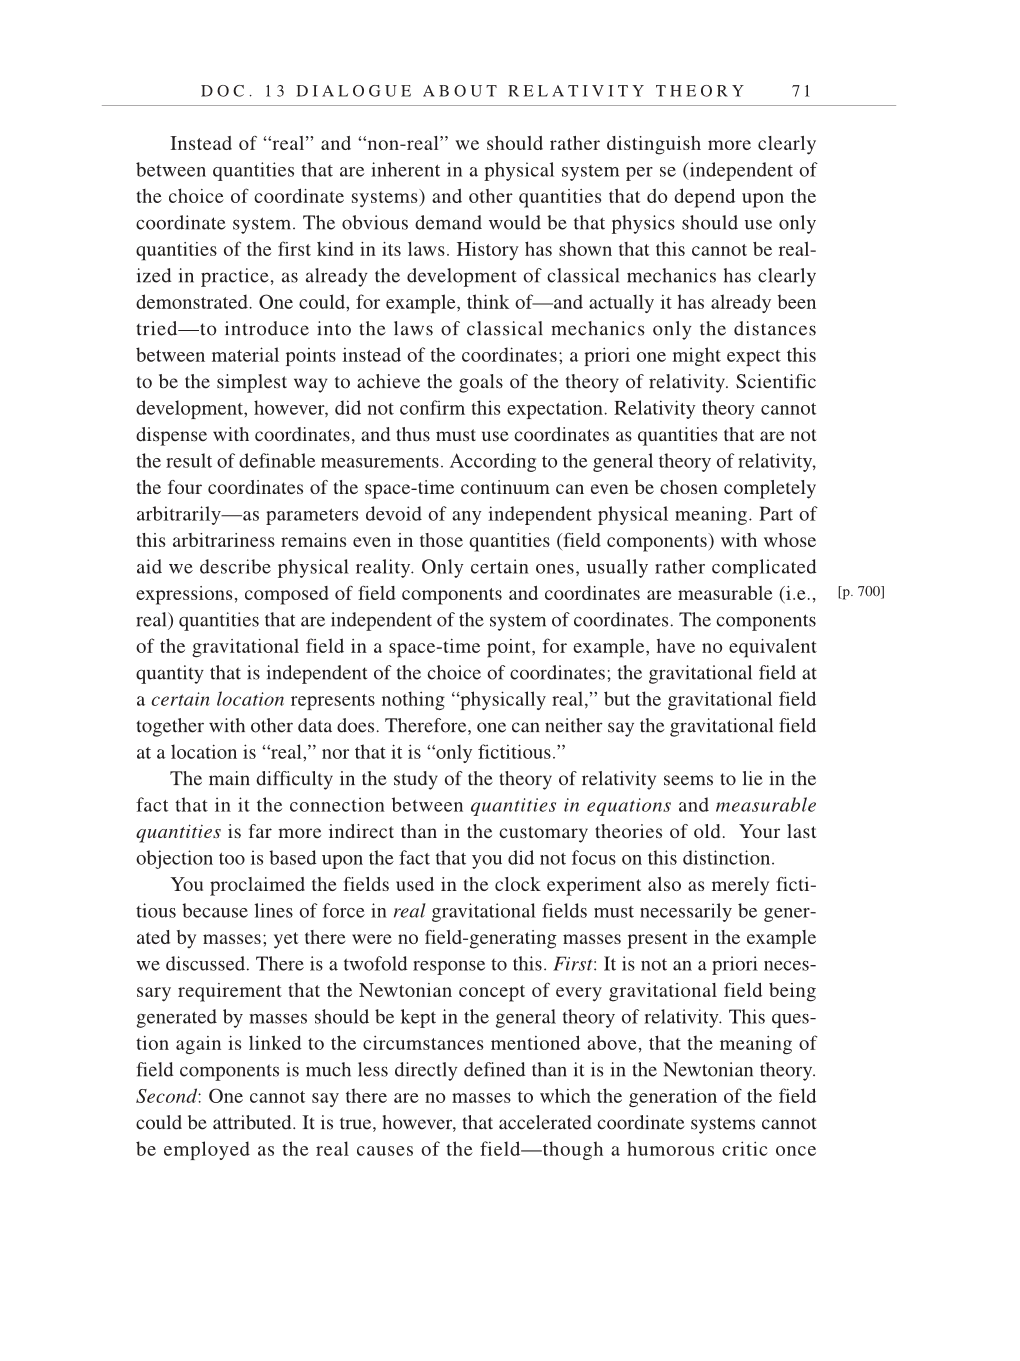 Volume 7: The Berlin Years: Writings, 1918-1921 (English translation supplement) page 71